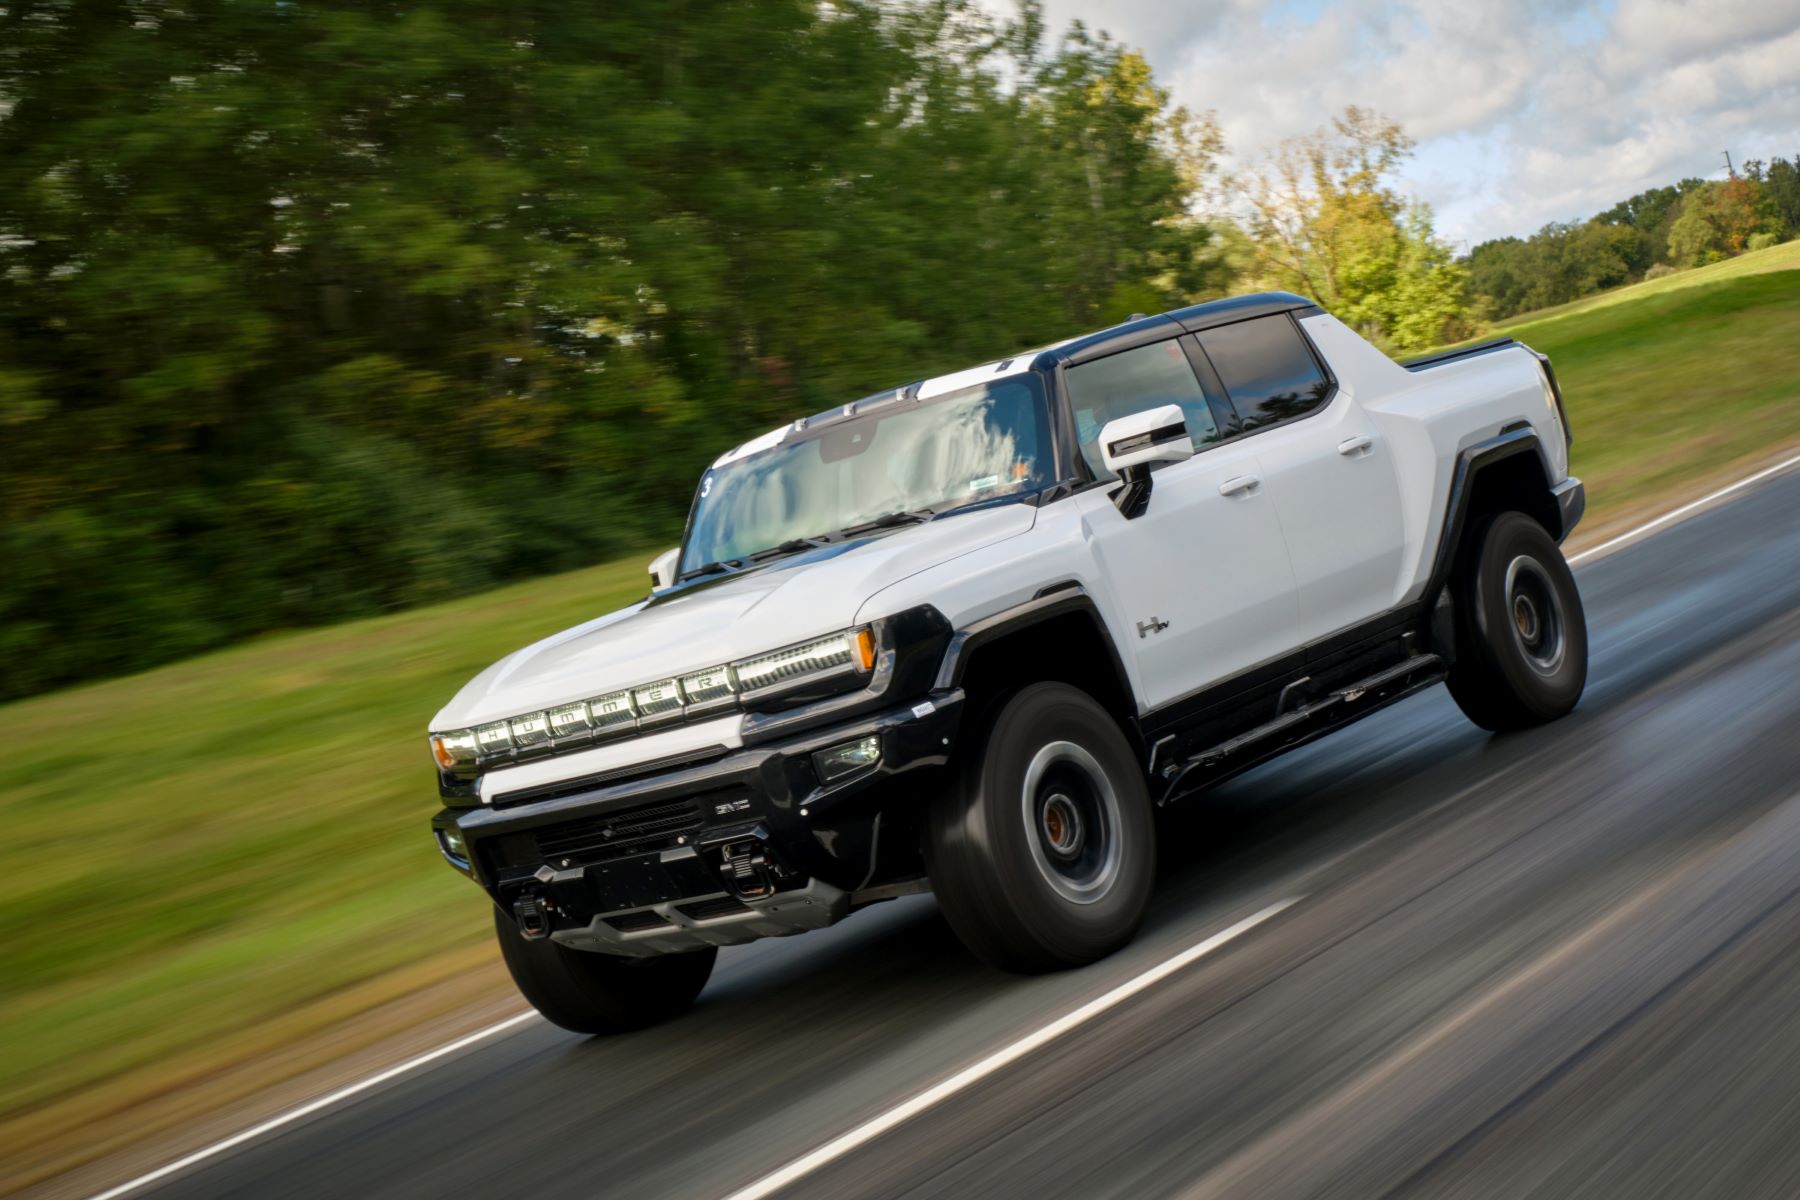 The GMC Hummer EV pickup truck has more electric driving range than the Rivian R1T and Ford F-150 Lightning